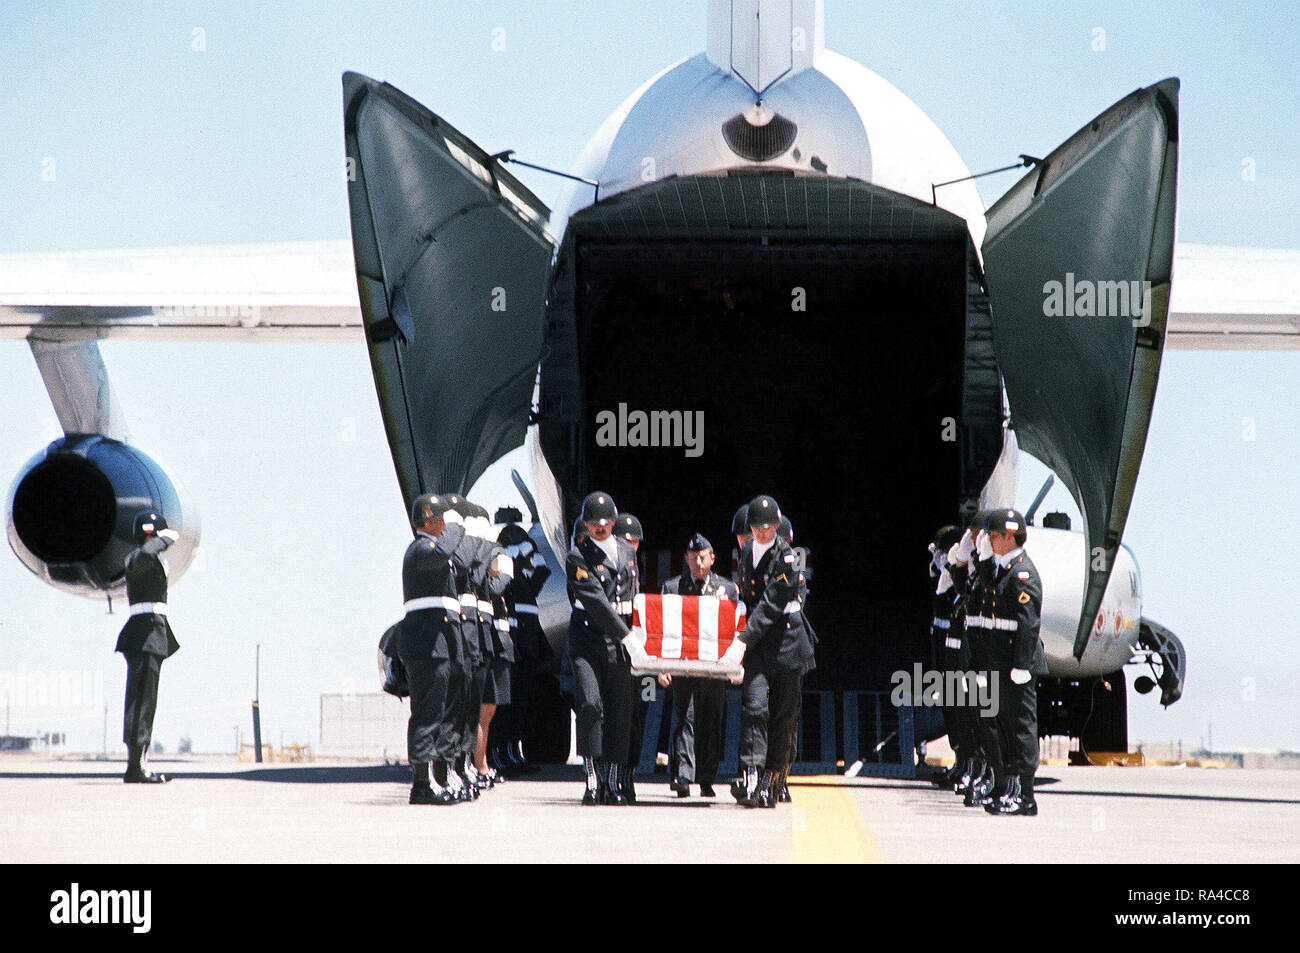 1977 - An Army color guard stands at attention as pallbearers remove the caskets of three U.S. Army soldiers who were killed in a helicopter crash in Korea. Stock Photo